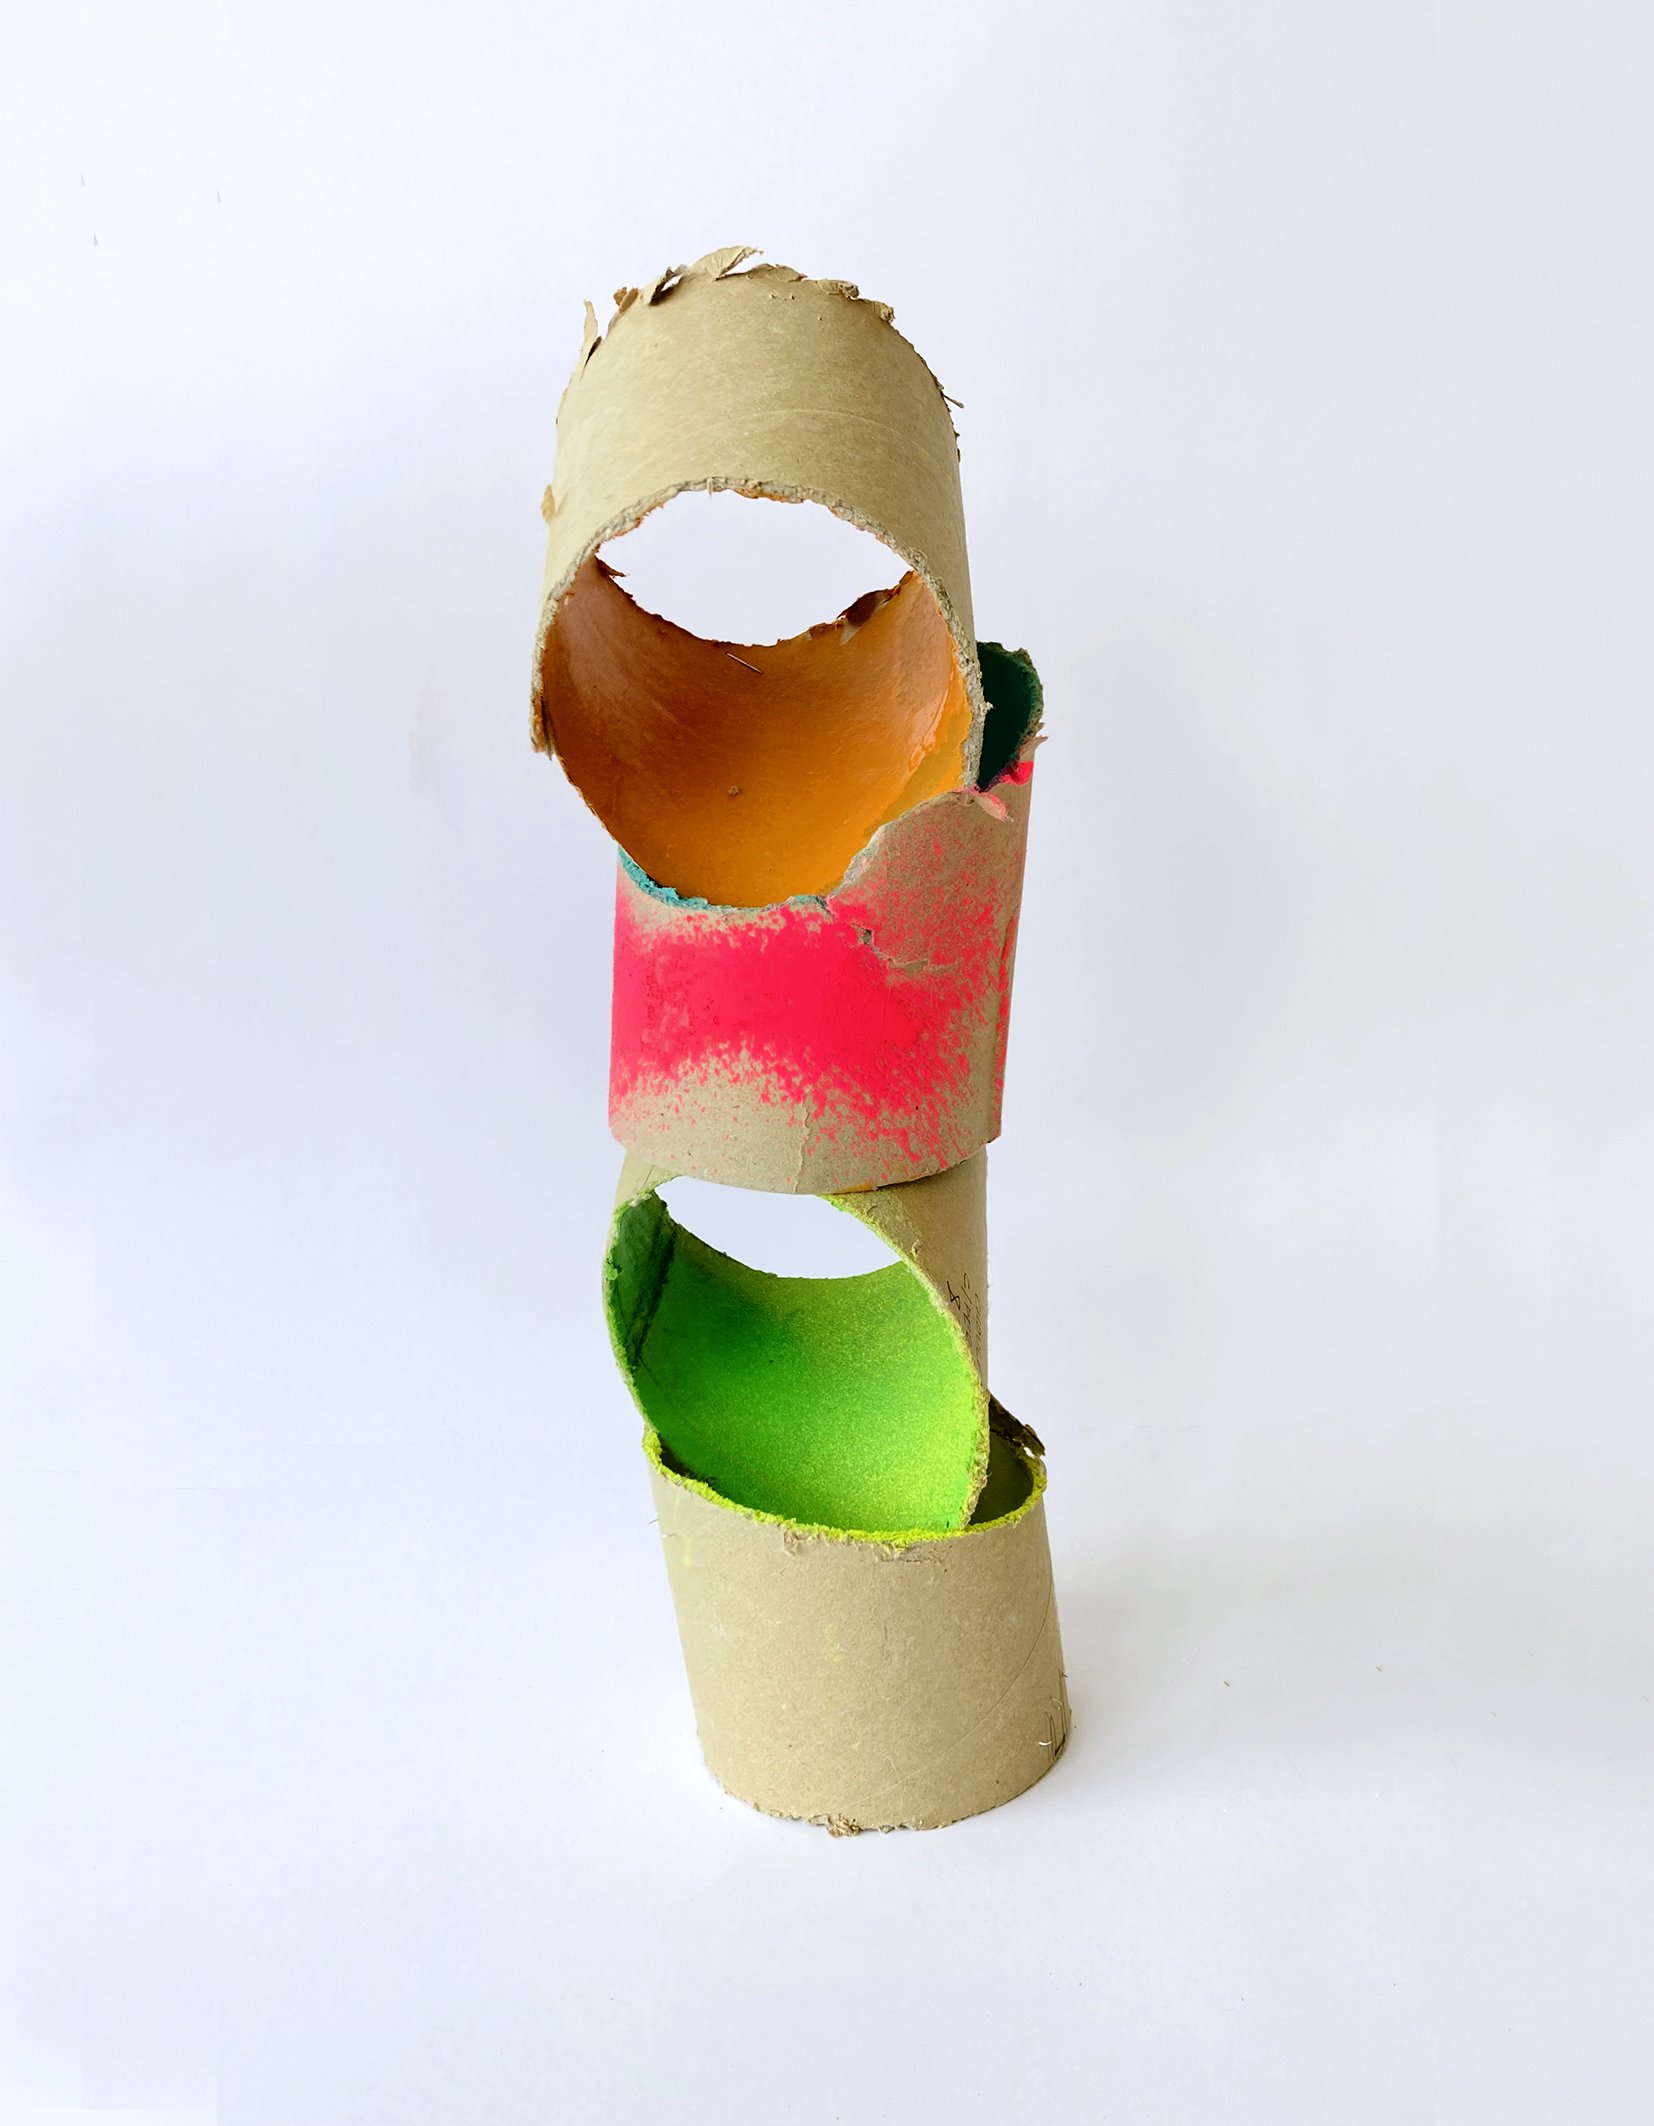 Collapse 1, fabric roll cut with a saw and then spray painted, 30 cm x 10 cm, 2023